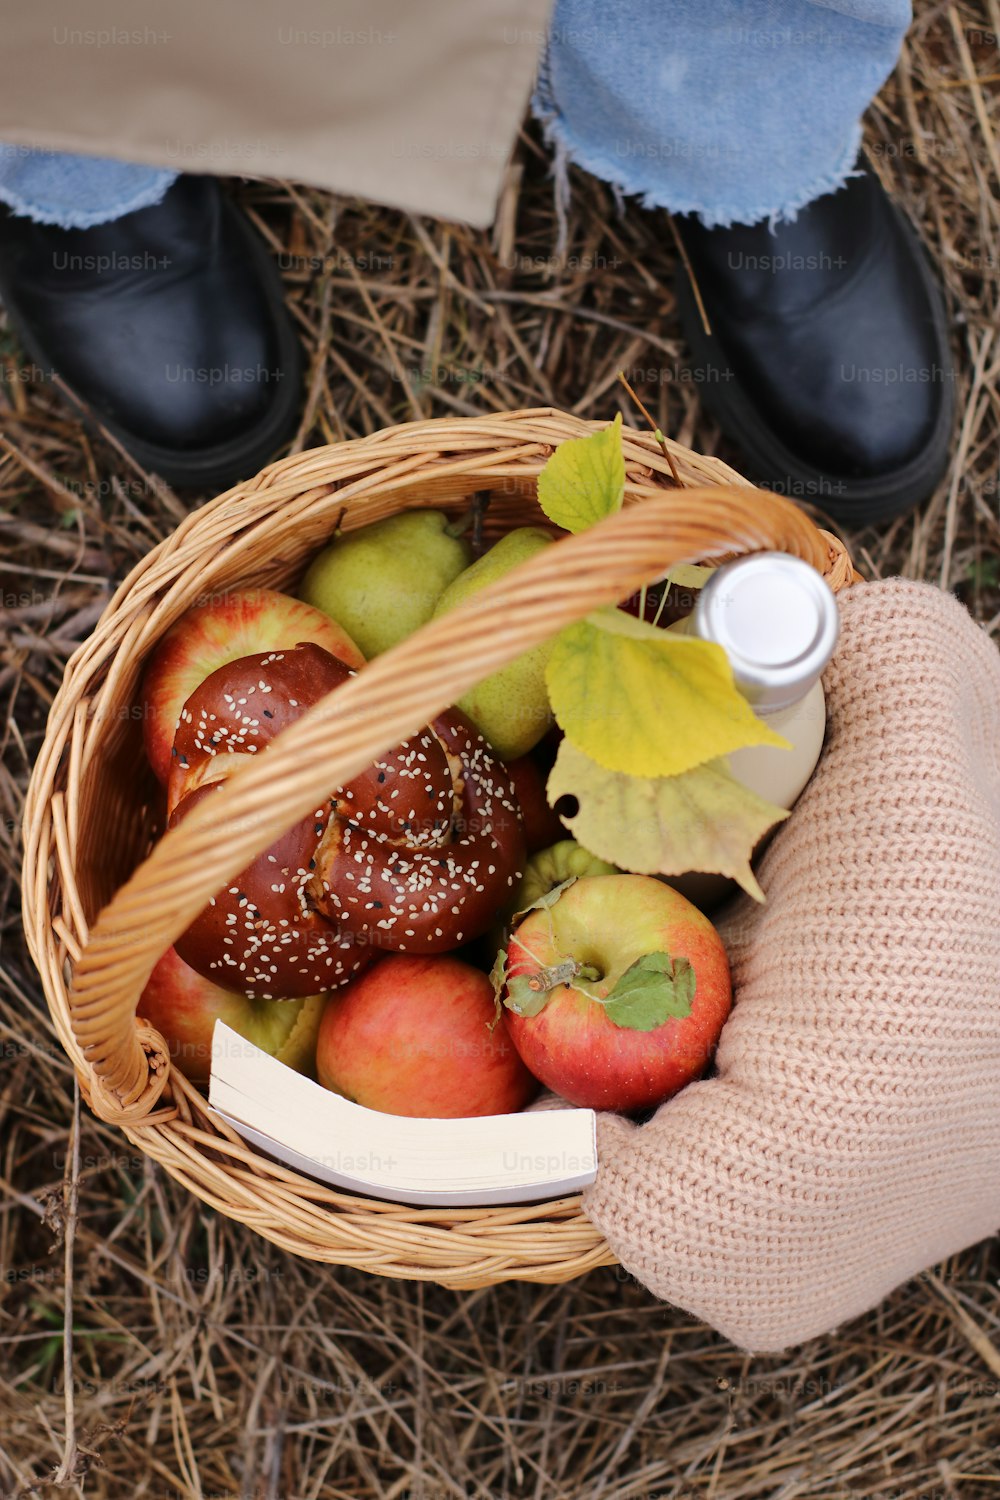 a person holding a basket full of apples